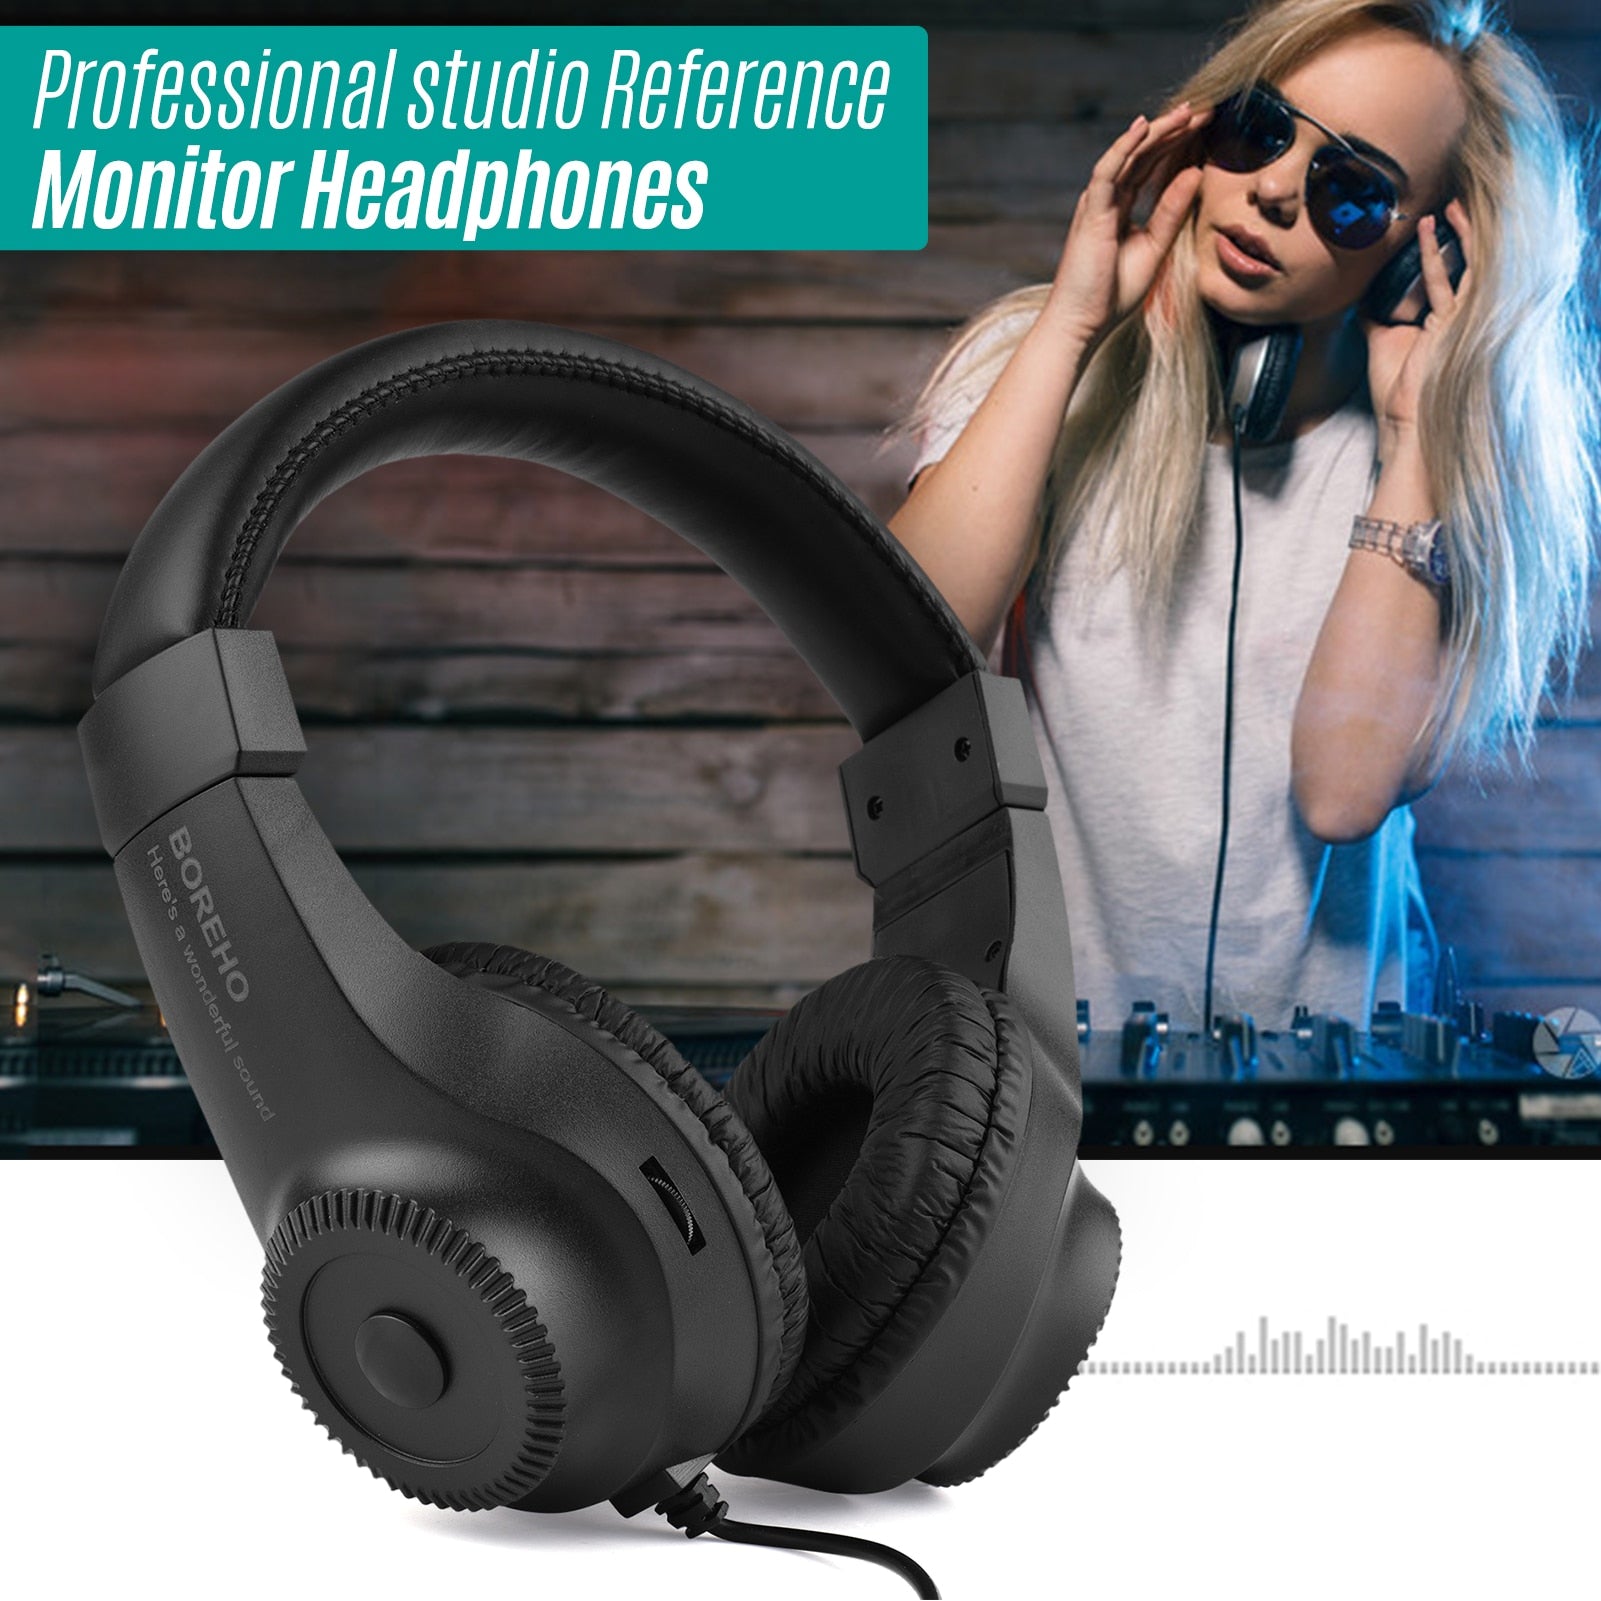 High-Fidelity  Professional  Clear Sound  Studio-Quality  Comfortable Fit  Reliable  Precision Audio  Durable  Wired Connectivity  Immersive  Balanced Acoustics  Over-ear Design  Exceptional Clarity  Noise Isolation  Robust Construction